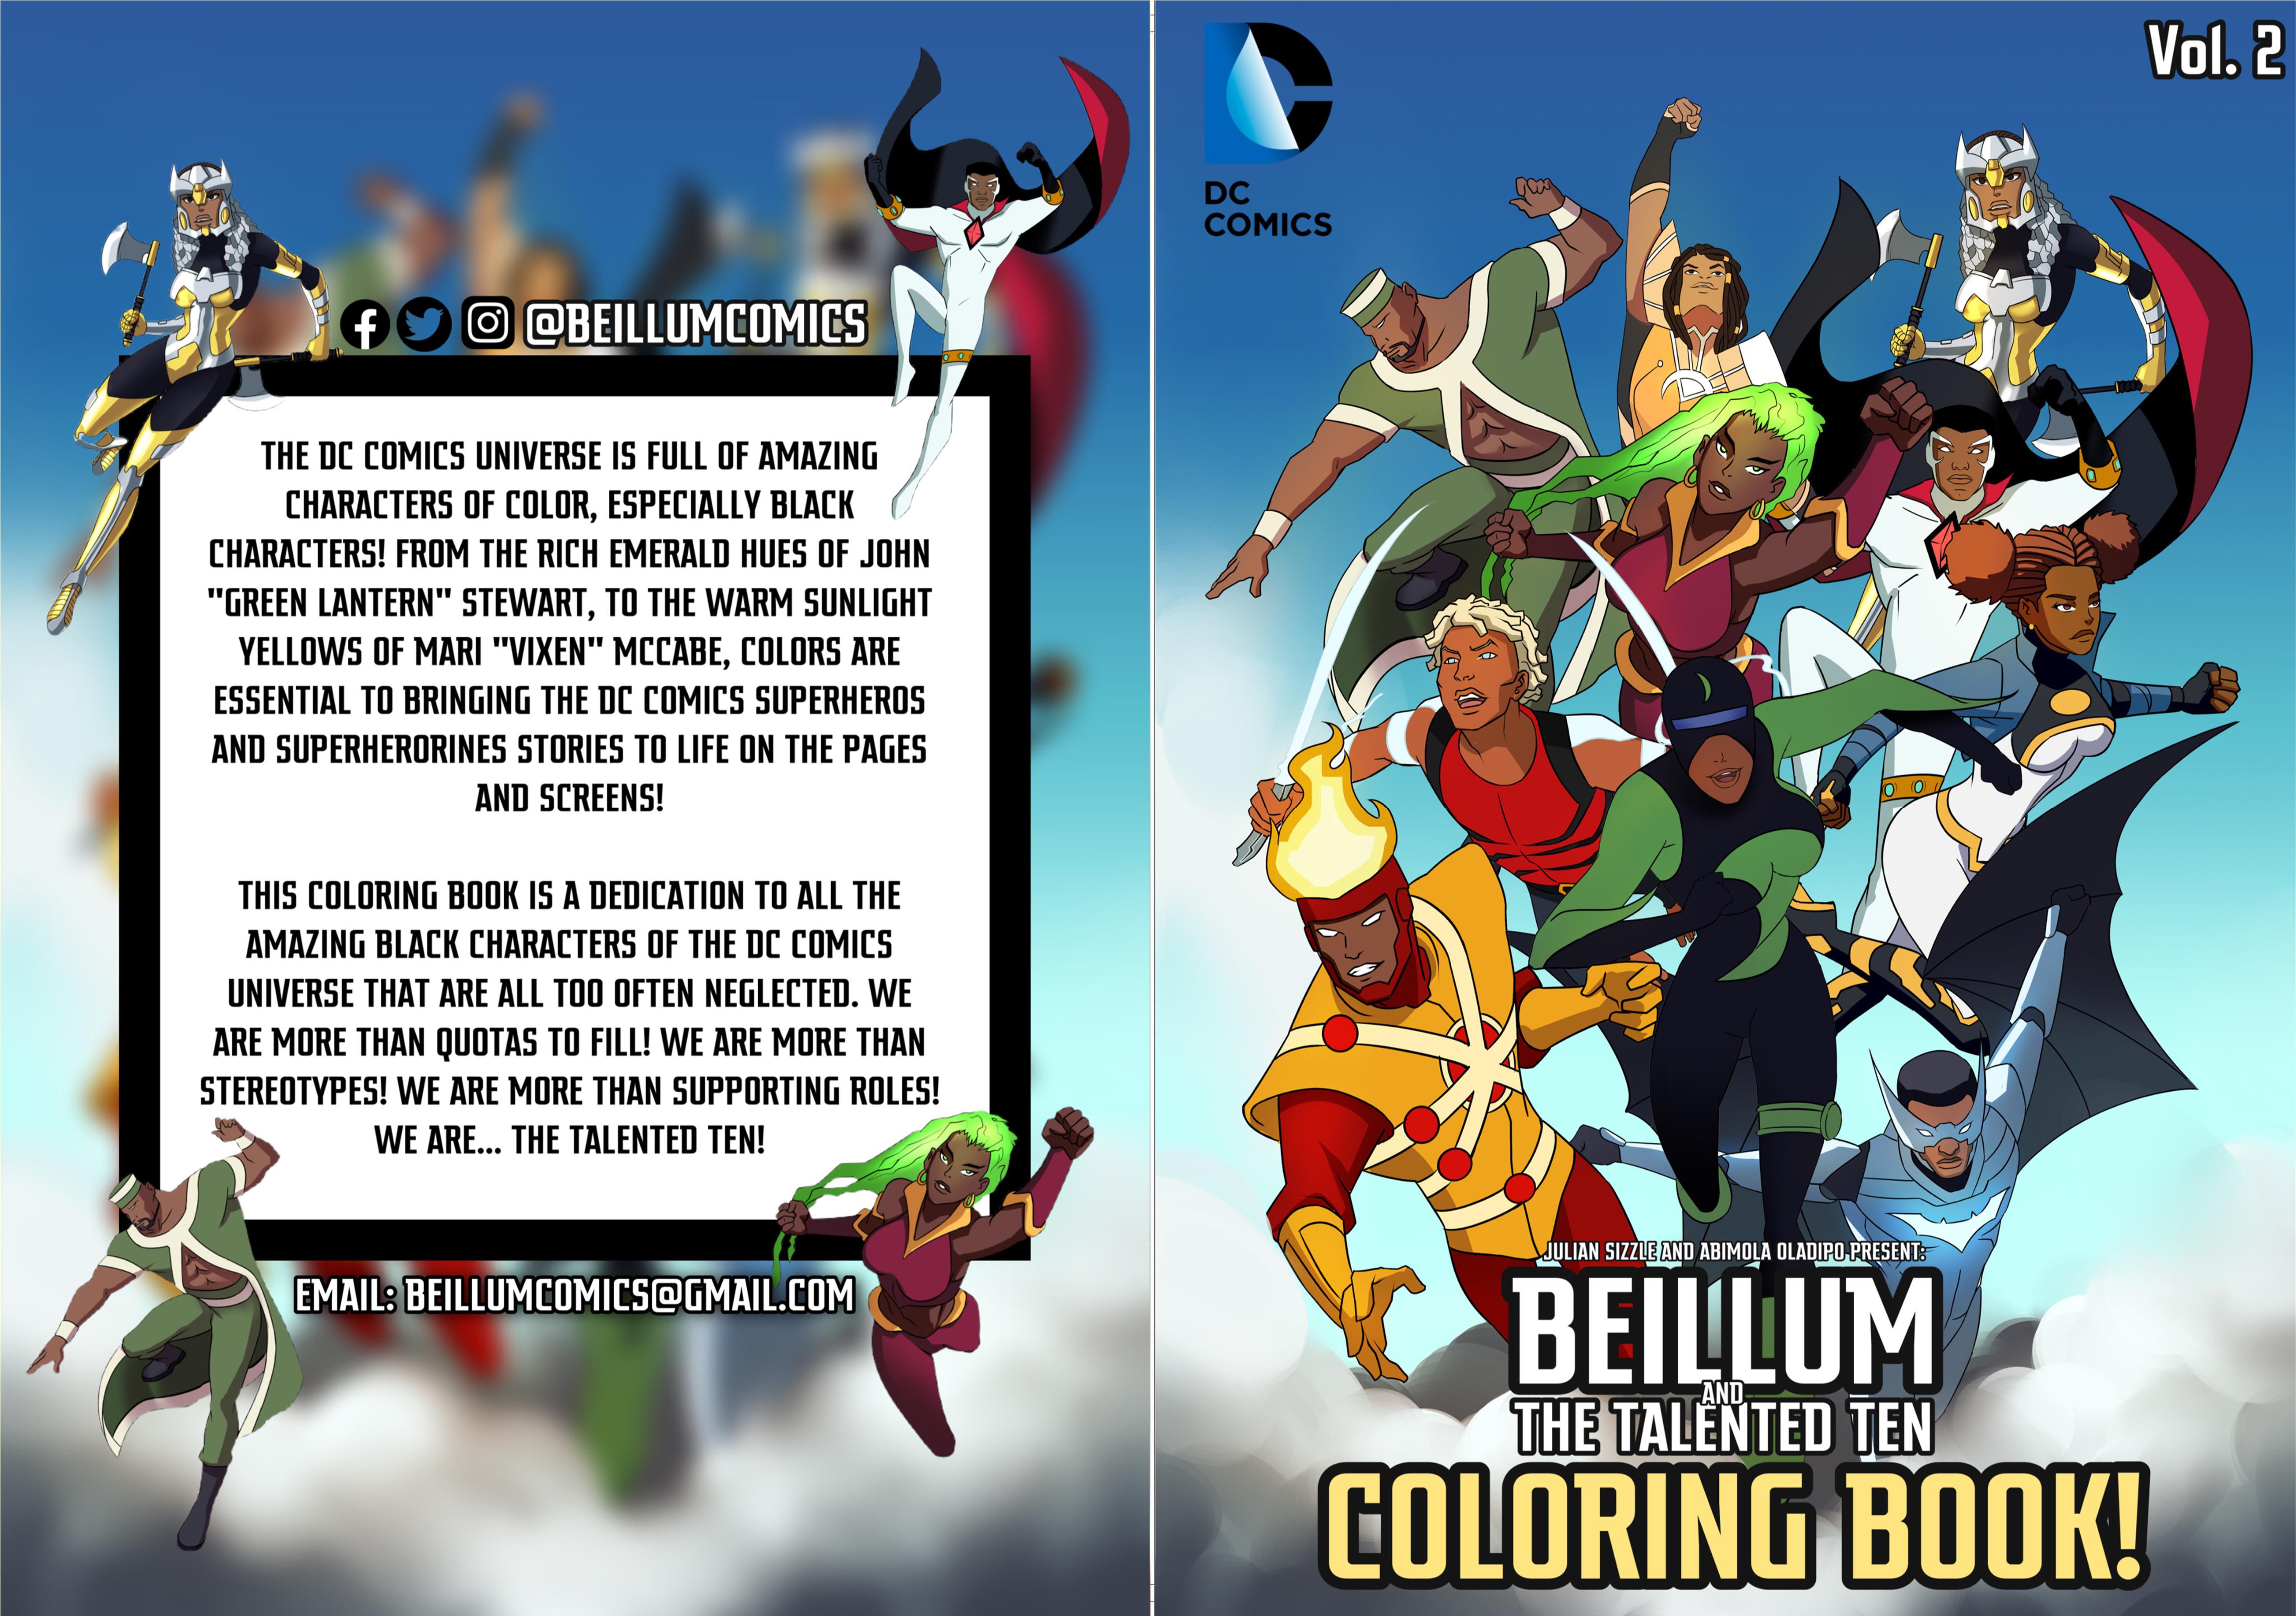 Beillum & The Talented Ten: Coloring Book (Vol. 2) cover image